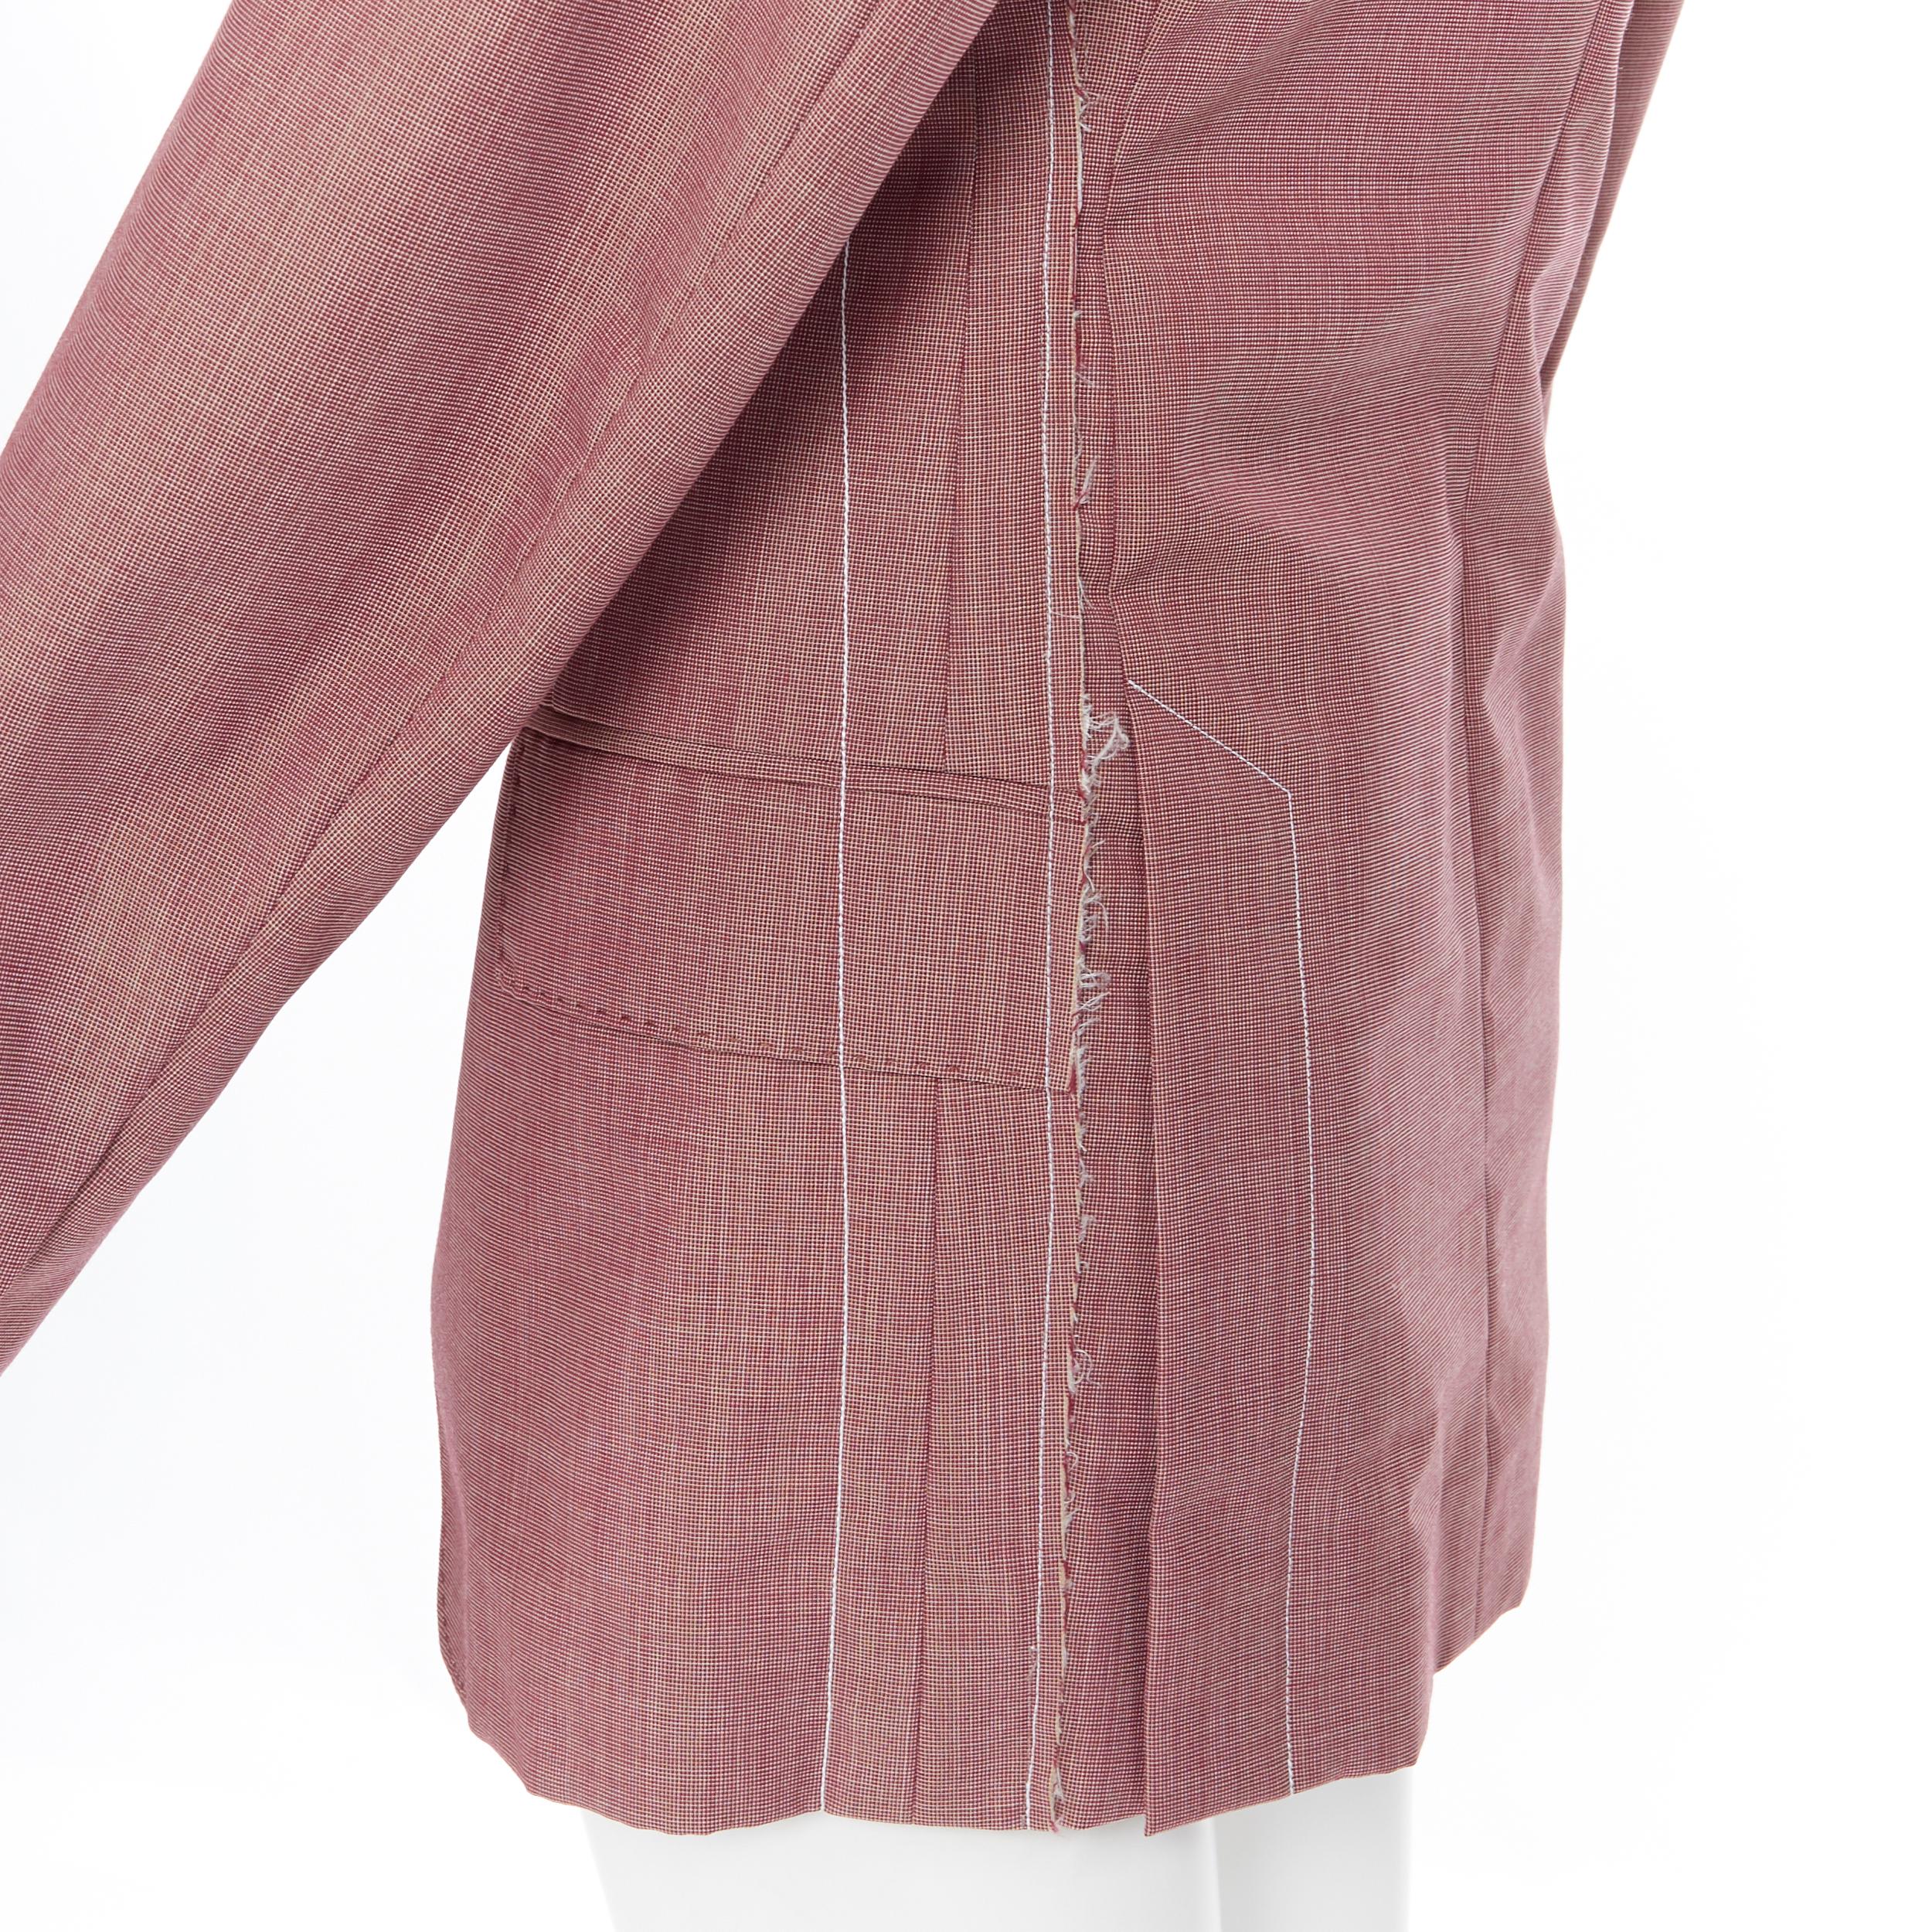 runway OLD CELINE PHOEBE PHILO pink wool cinched waist oversized blazer FR36 S
Brand: Celine
Designer: Phoebe Philo
Model Name / Style: Fitted blazer
Material: Wool
Color: Pink
Pattern: Solid
Closure: Button
Extra Detail: Dusty pink wool upper.